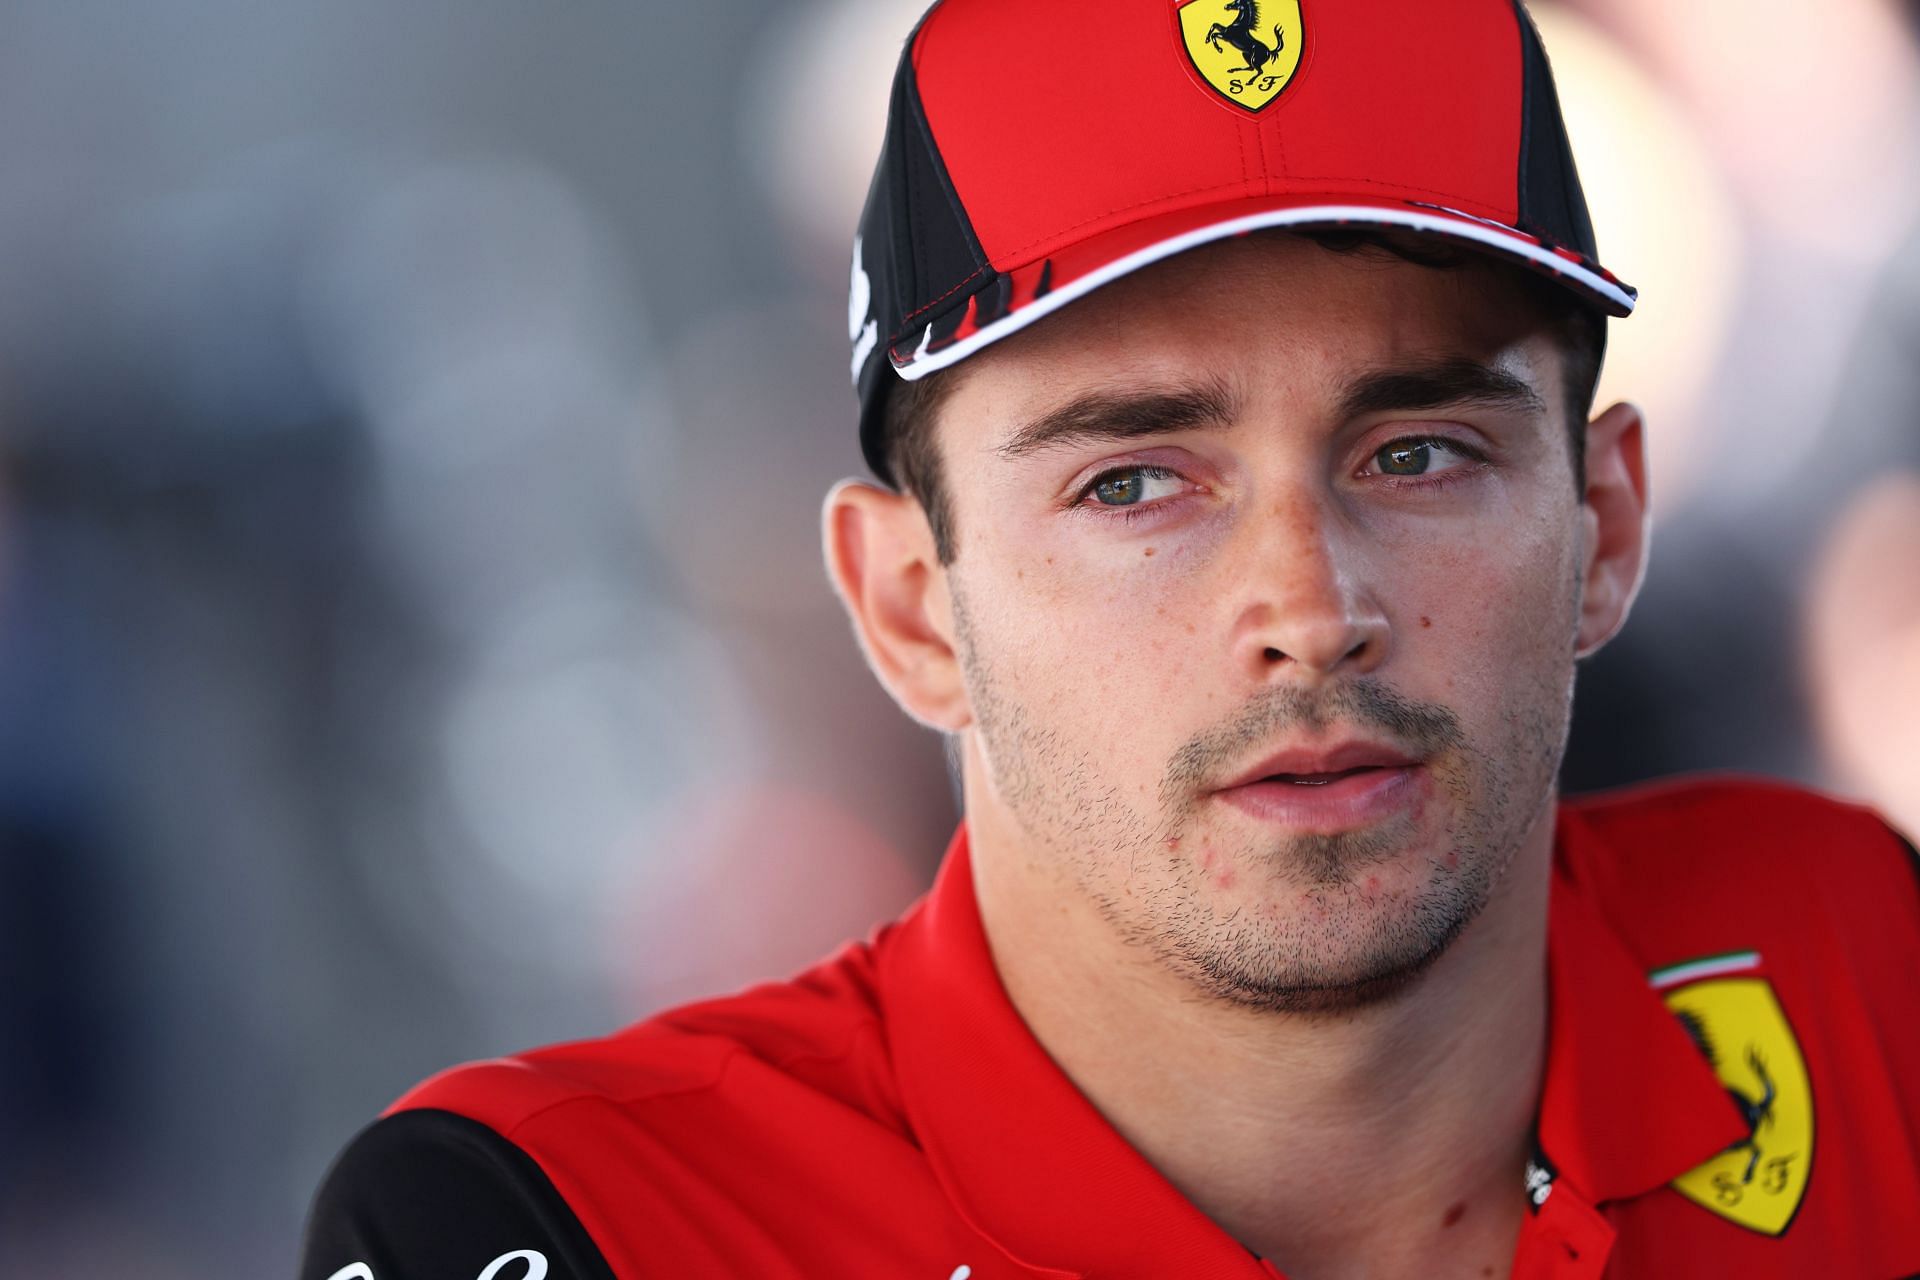 Charles Leclerc at the F1 Grand Prix of Canada - Practice